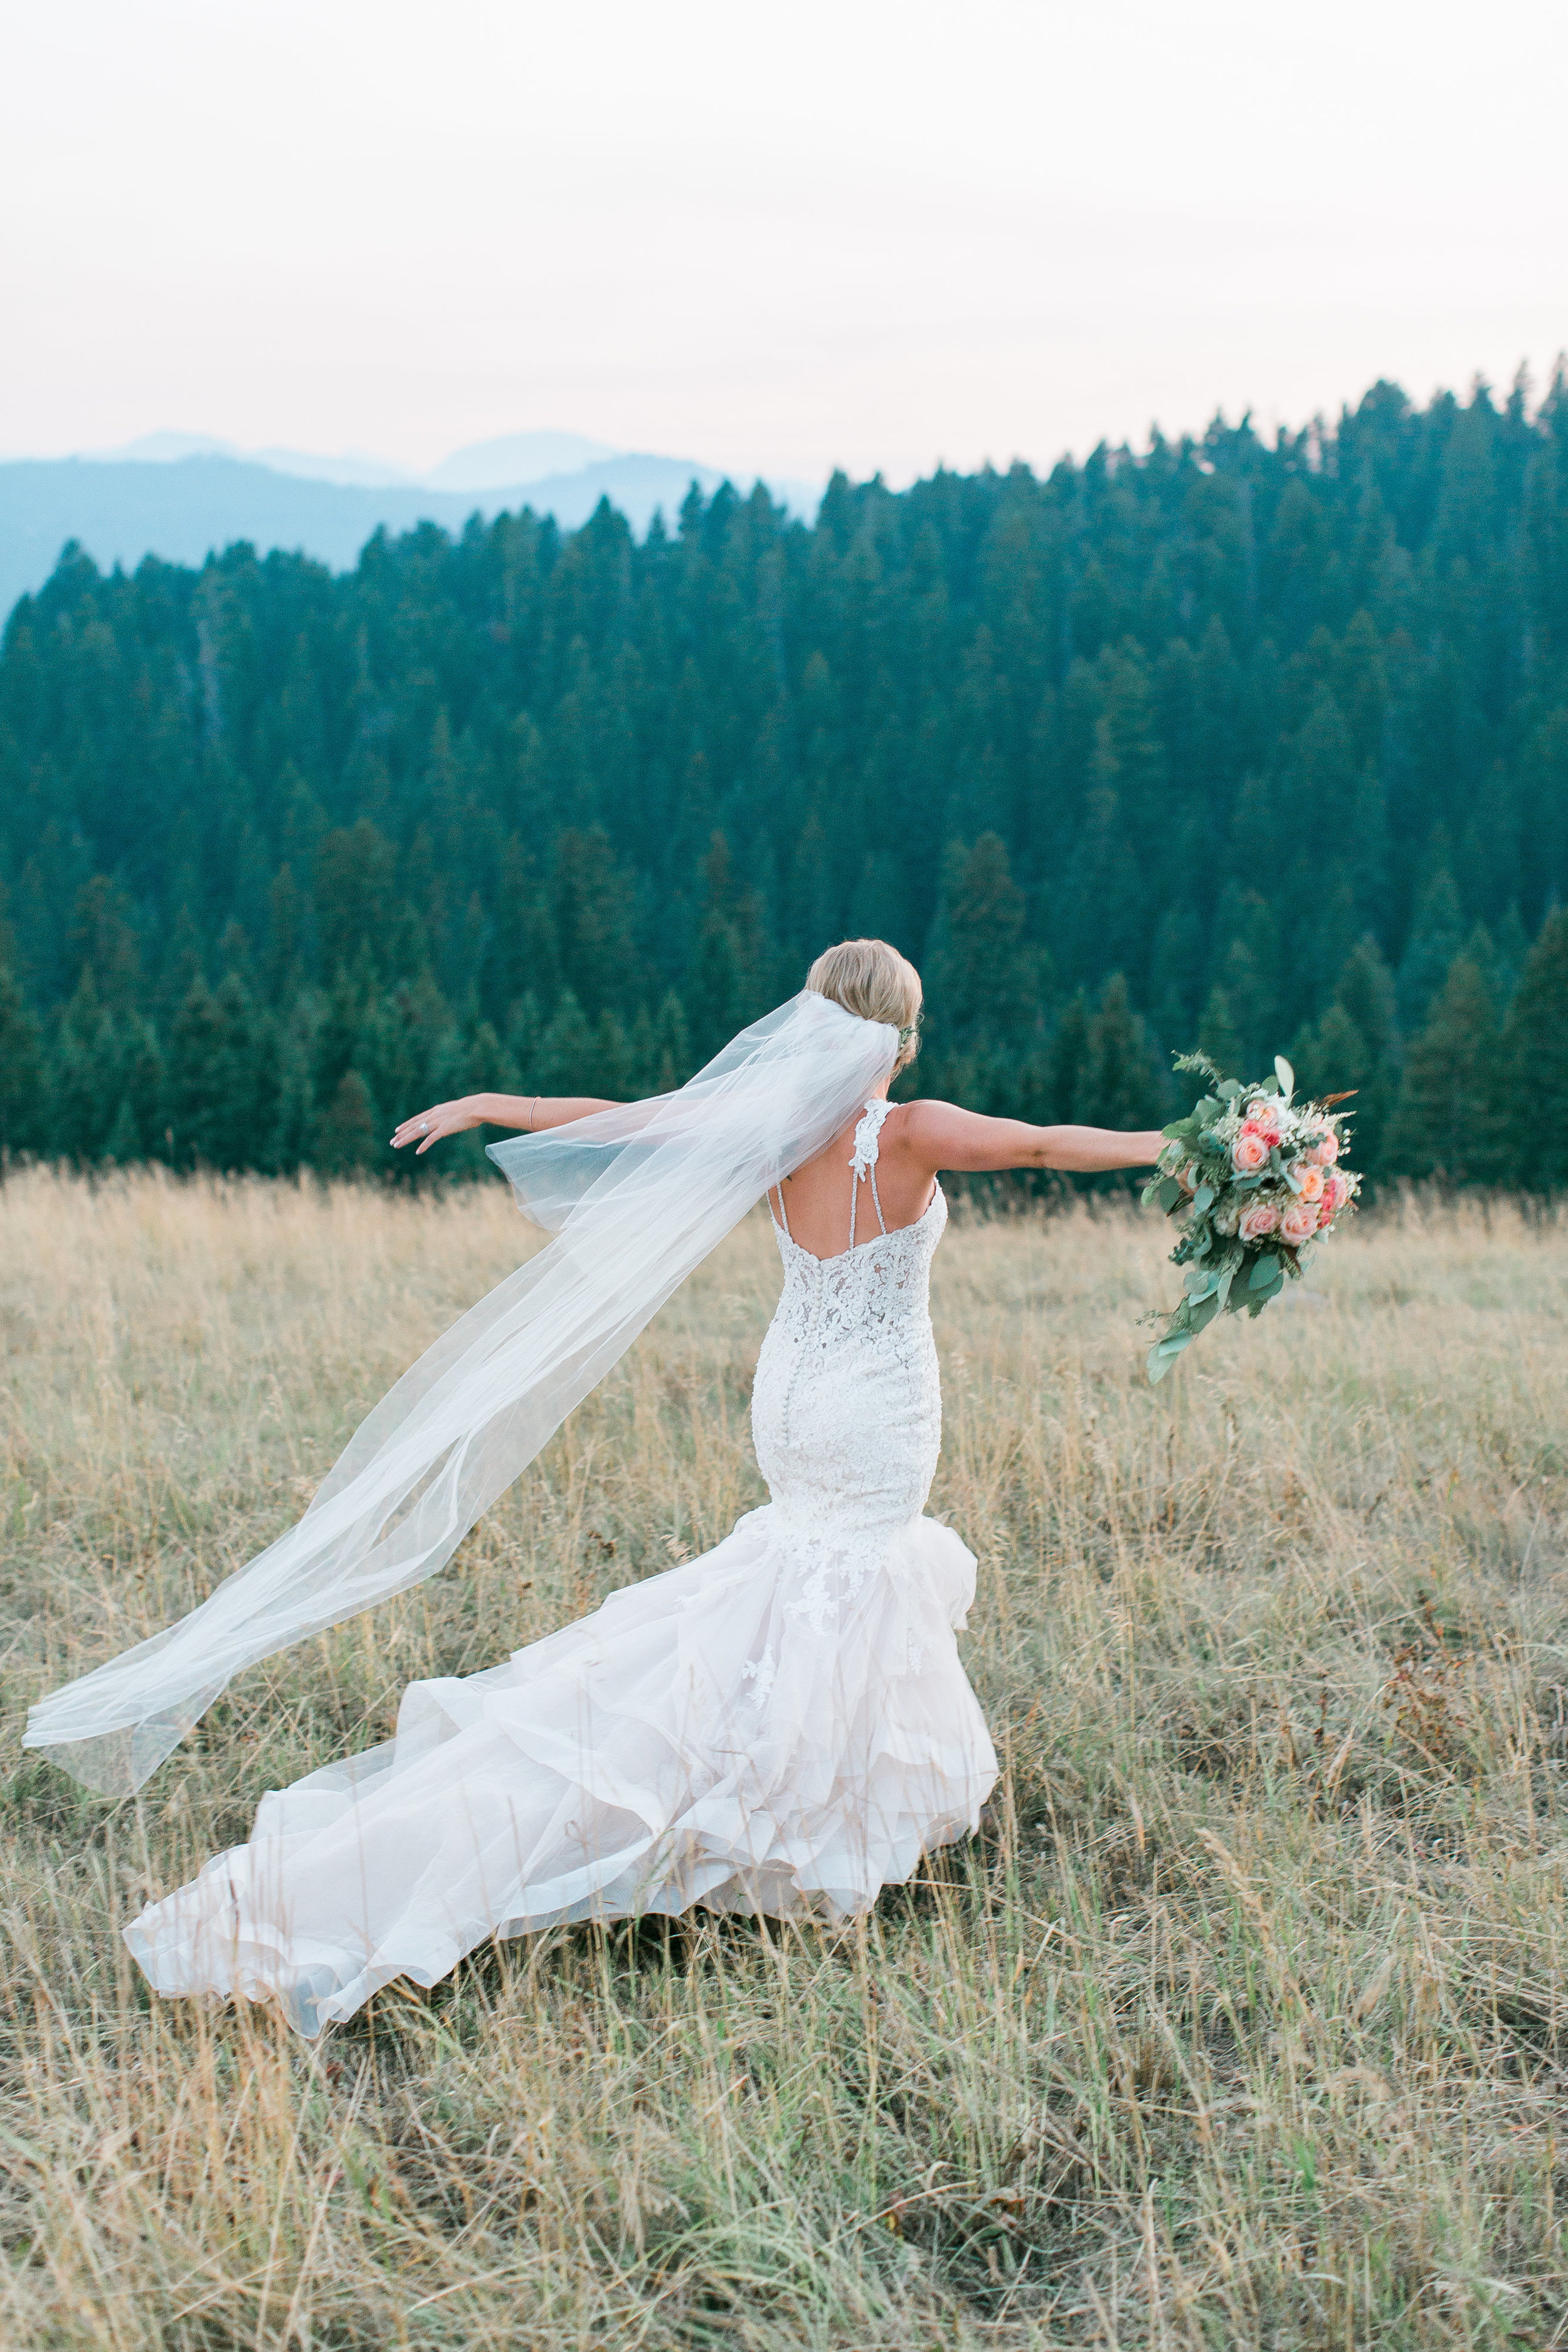 Boho bride walking with arms out free spirit and mountains in background Big Sky Montana Lone Mountain Ranch wedding Minnesota wedding photography Mallory Kiesow Photography